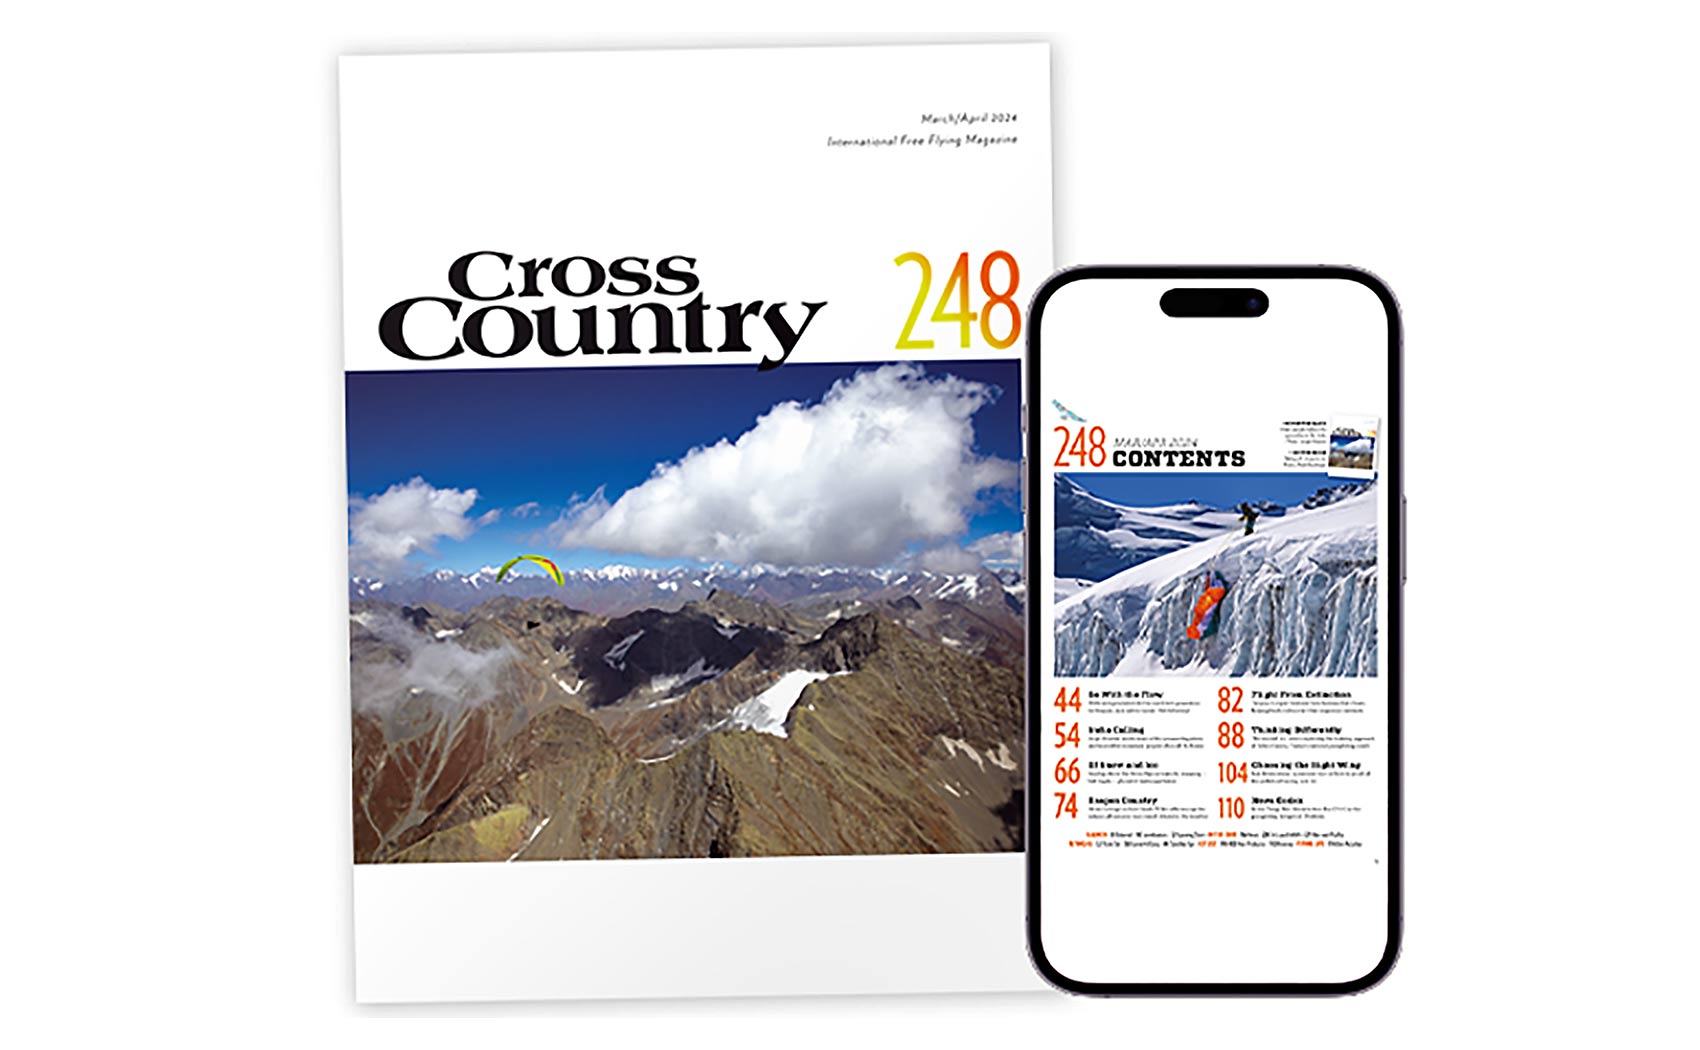 Cross Country Magazine Issue 248 (Early Spring)